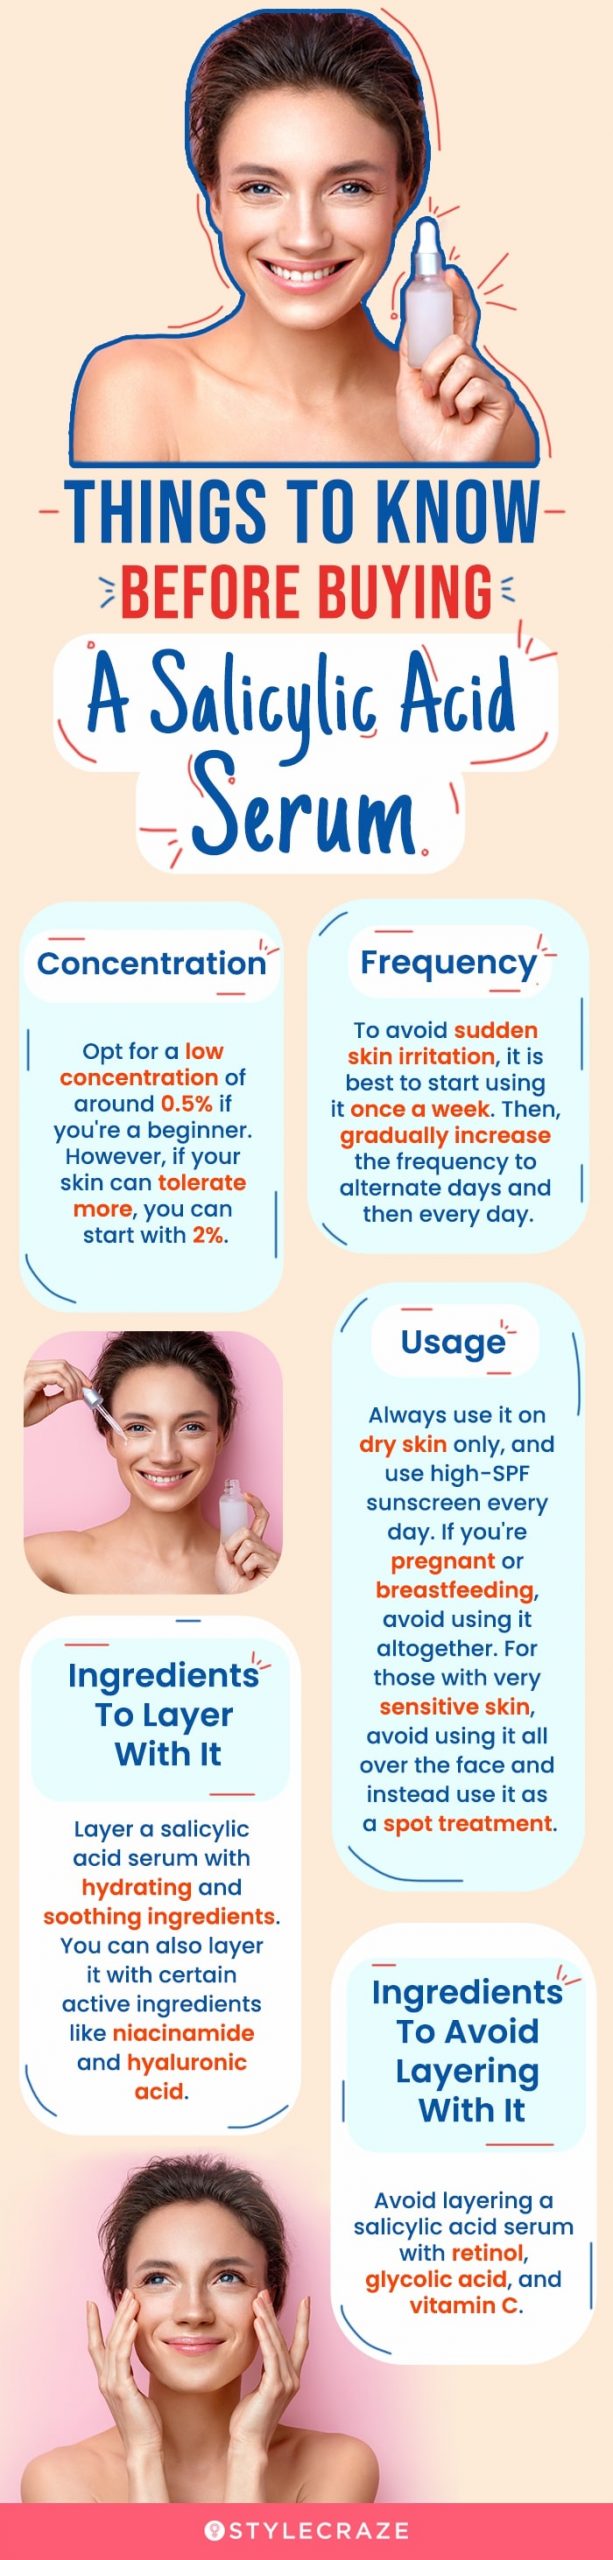 Things To Know Before Buying A Salicylic Acid Serum (infographic)